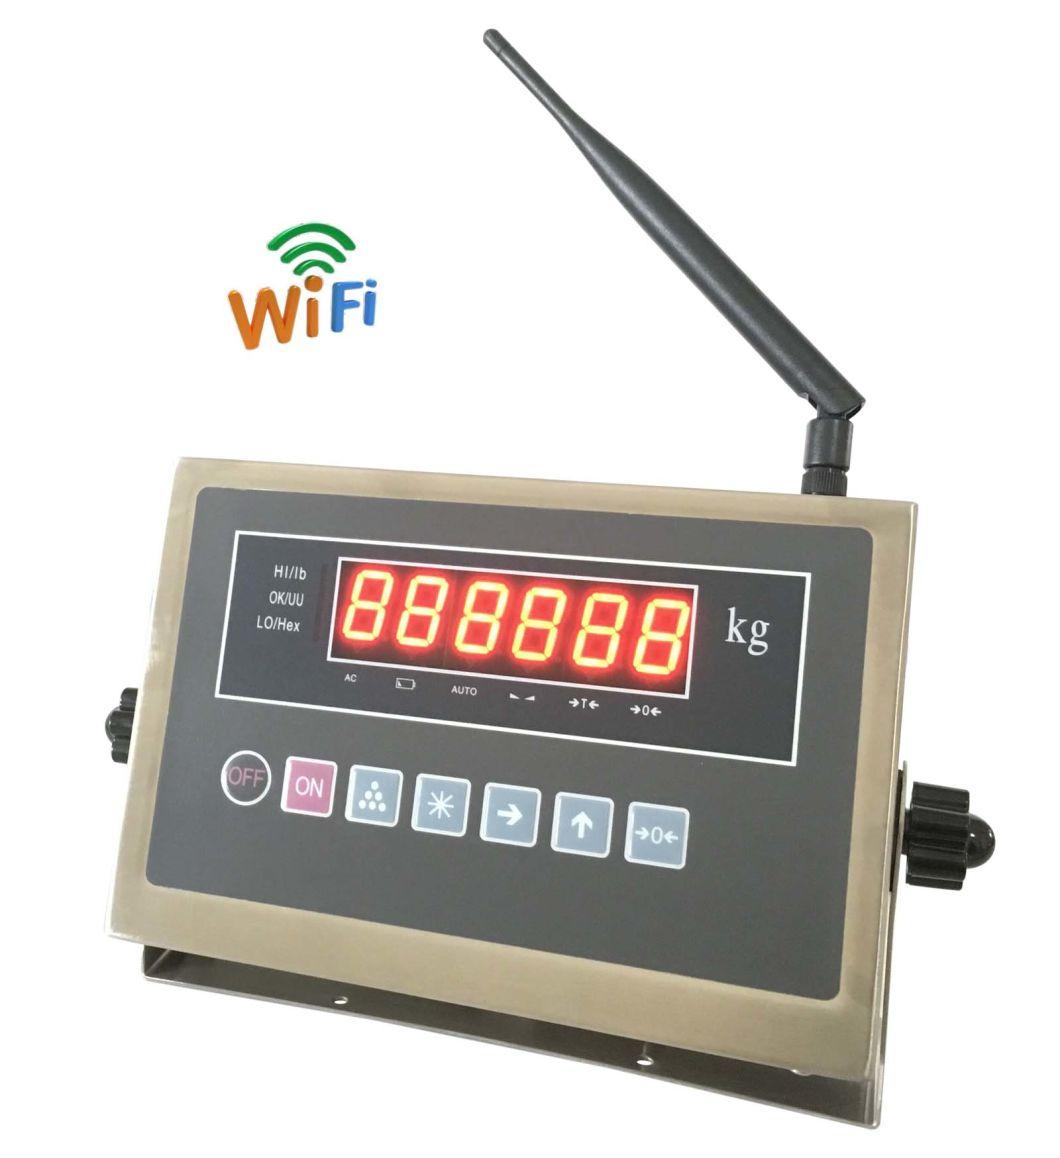 Stainless Steel Housing Wireless Functions Weighing Indicators/ Displayers with RS232/RS485 Serial Interface and WiFi/Wan/LAN Connector (XK315A1-RB-WiFi)